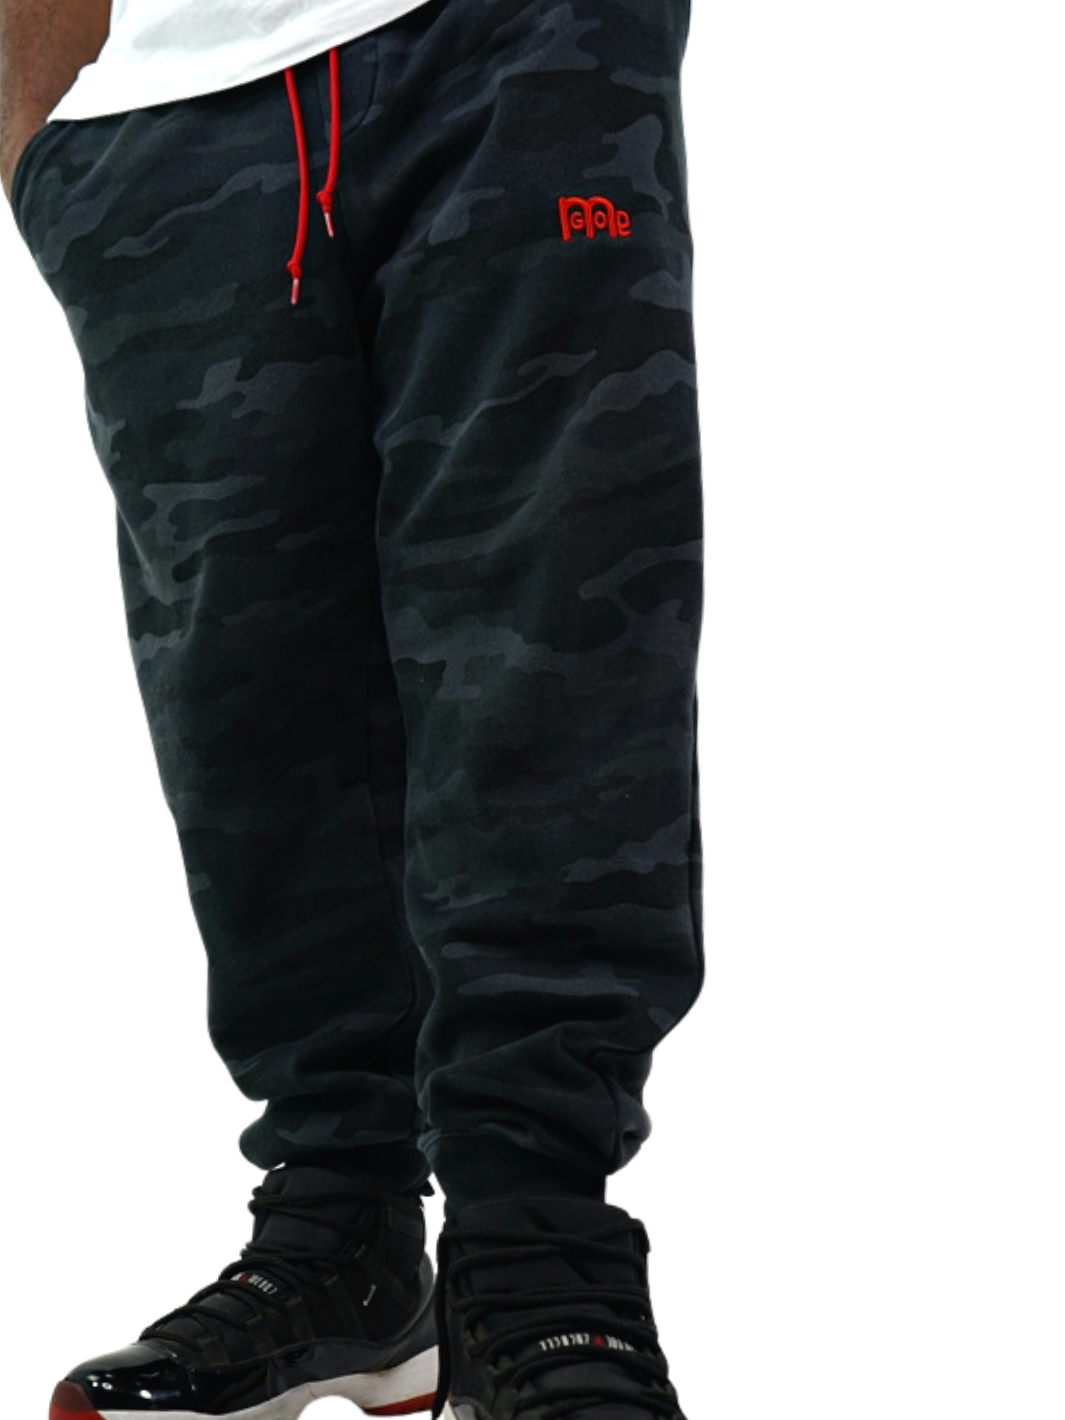 Experience ultimate comfort and style in the Men's GODinme Black Camouflage SweatPants from our Romans 12:21 Collection. Featuring the iconic Red GODinme logo, Red shoestring draw cord, and sewn fly details; its time to elevate your faith with these must-have joggers.